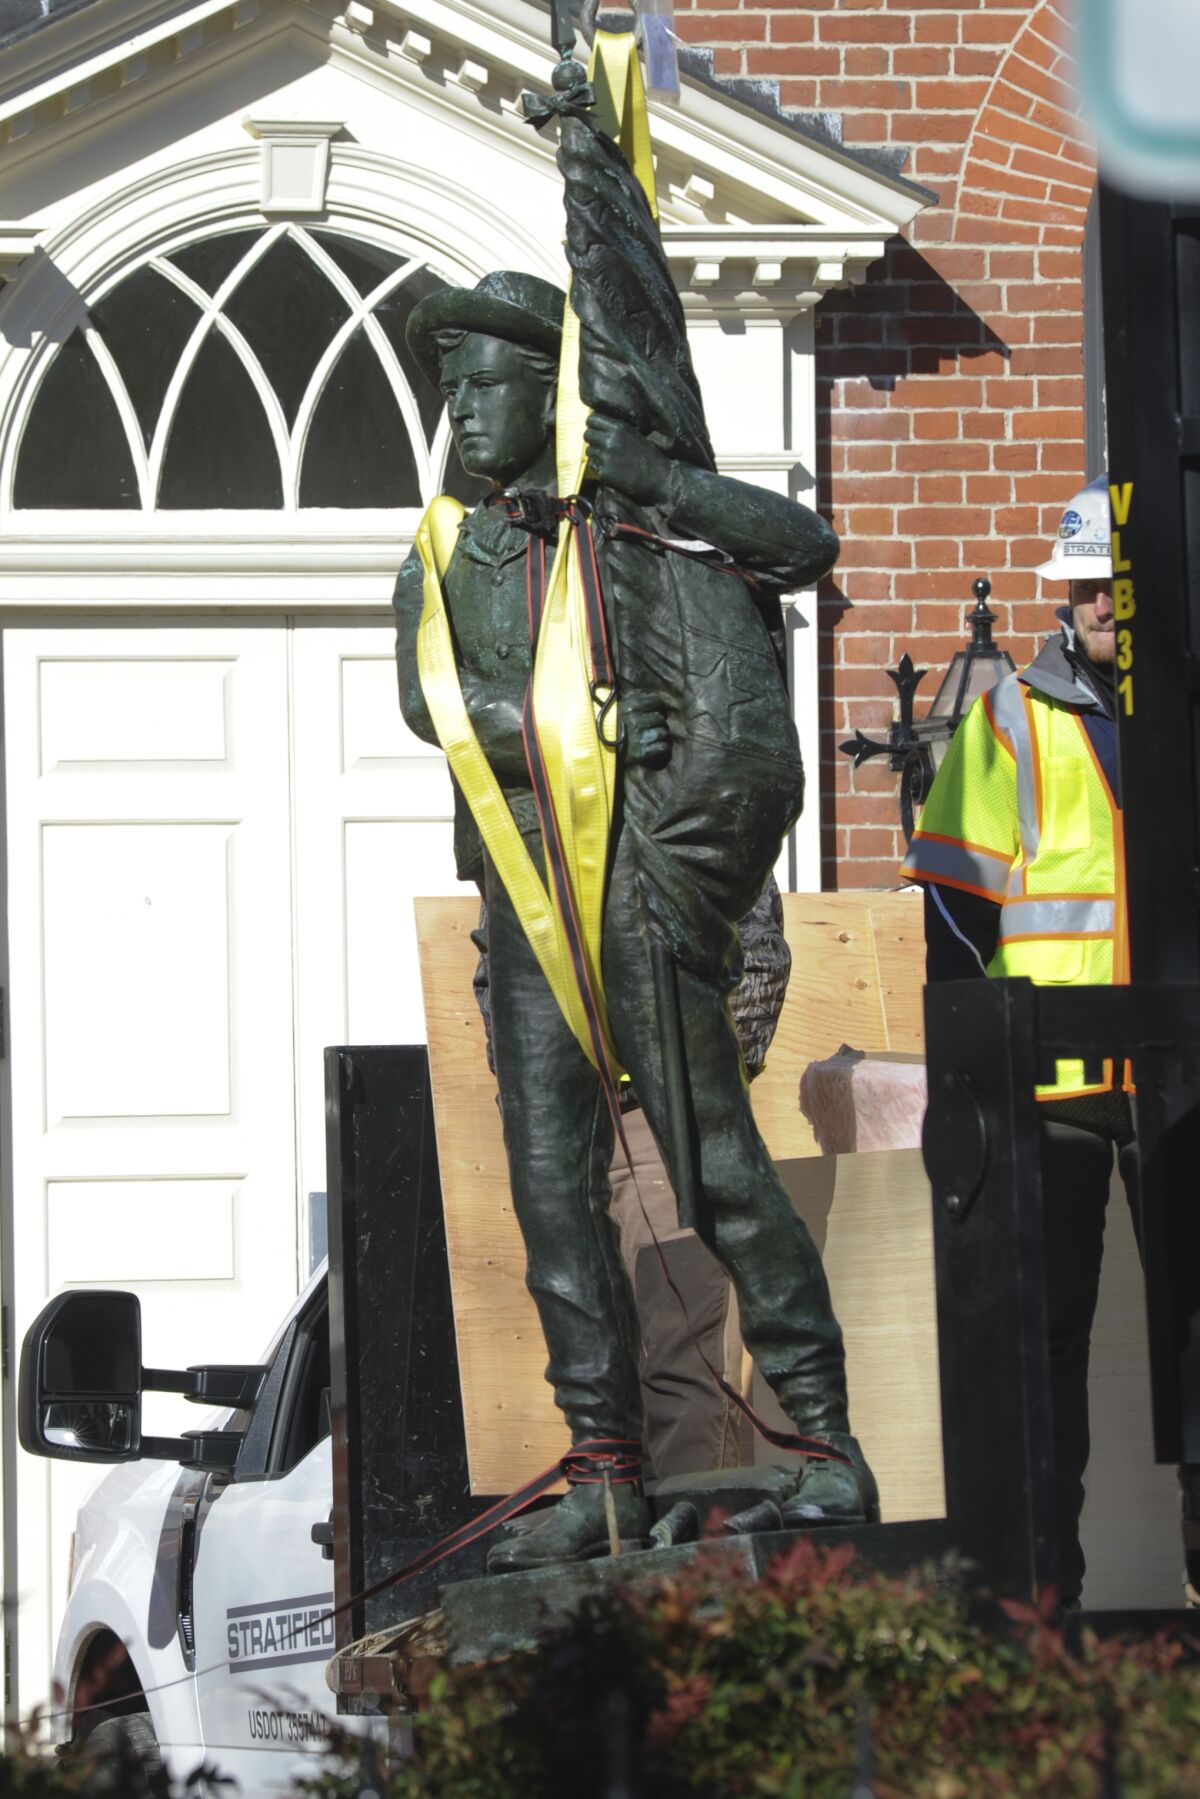 A crew removes the Talbot Boys Statue, Maryland's last public Confederate statue, on the grounds of the Talbot County Courthouse, Monday, March 14, 2022, in Easton, Md. The 13-foot tall, copper sculpture features a boy holding a Confederate flag and names the Talbot County men who joined the Confederacy and died in the war. (Tom McCall/Easton Star Democrat via AP)